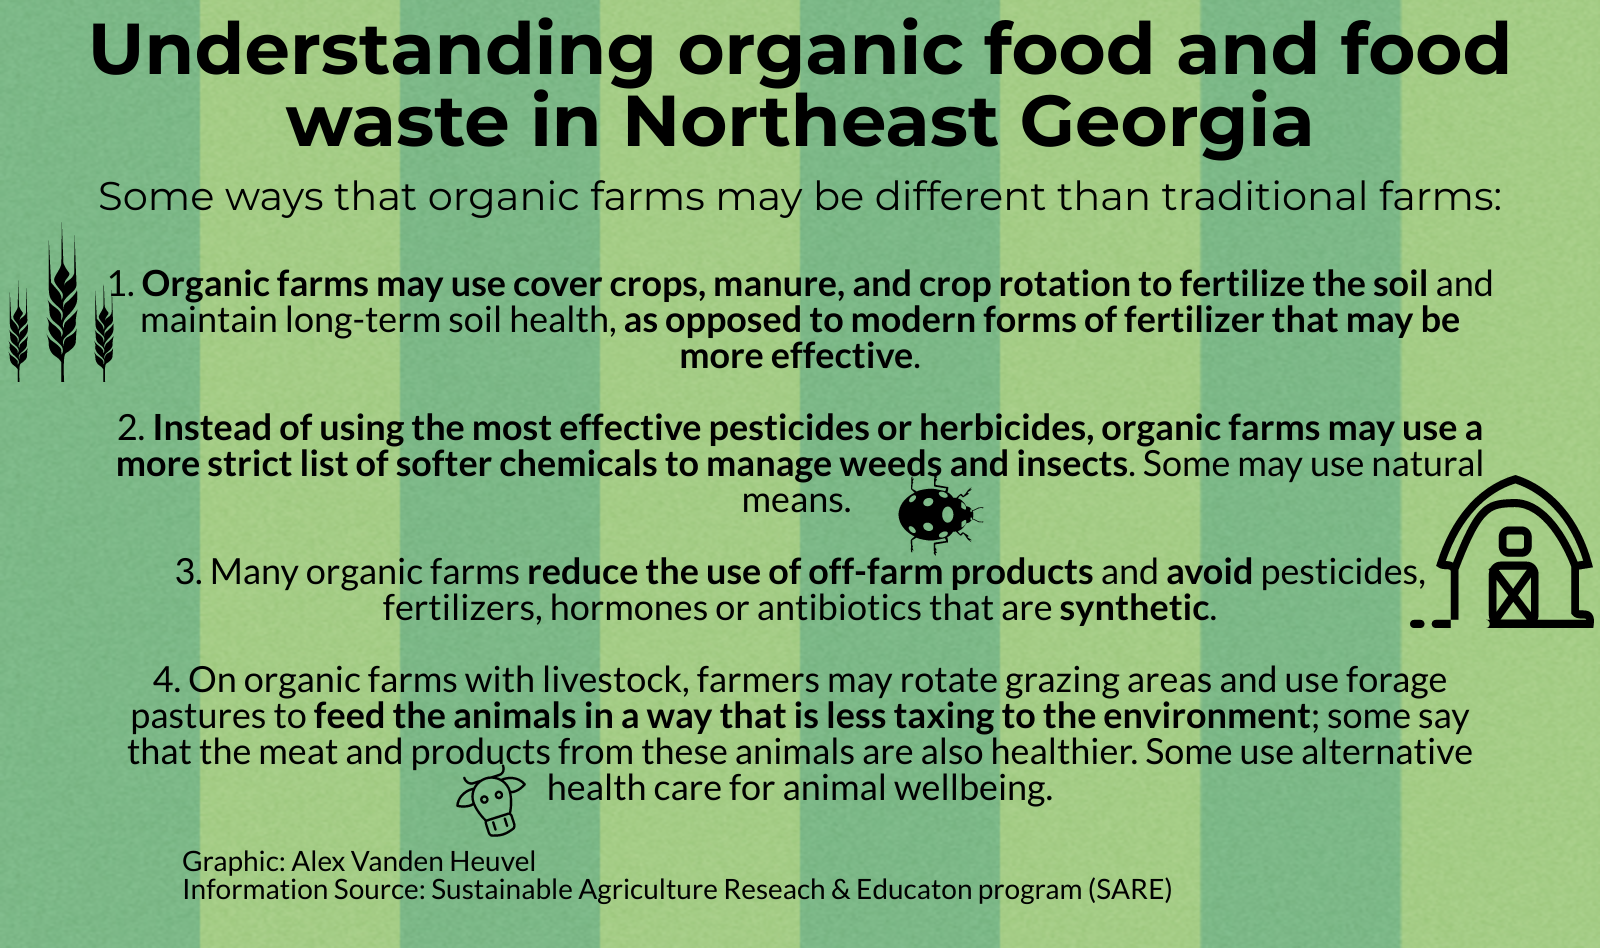 Most of the differences between organic and traditional farming techniques involve the avoidance of synthetic or outside materials.